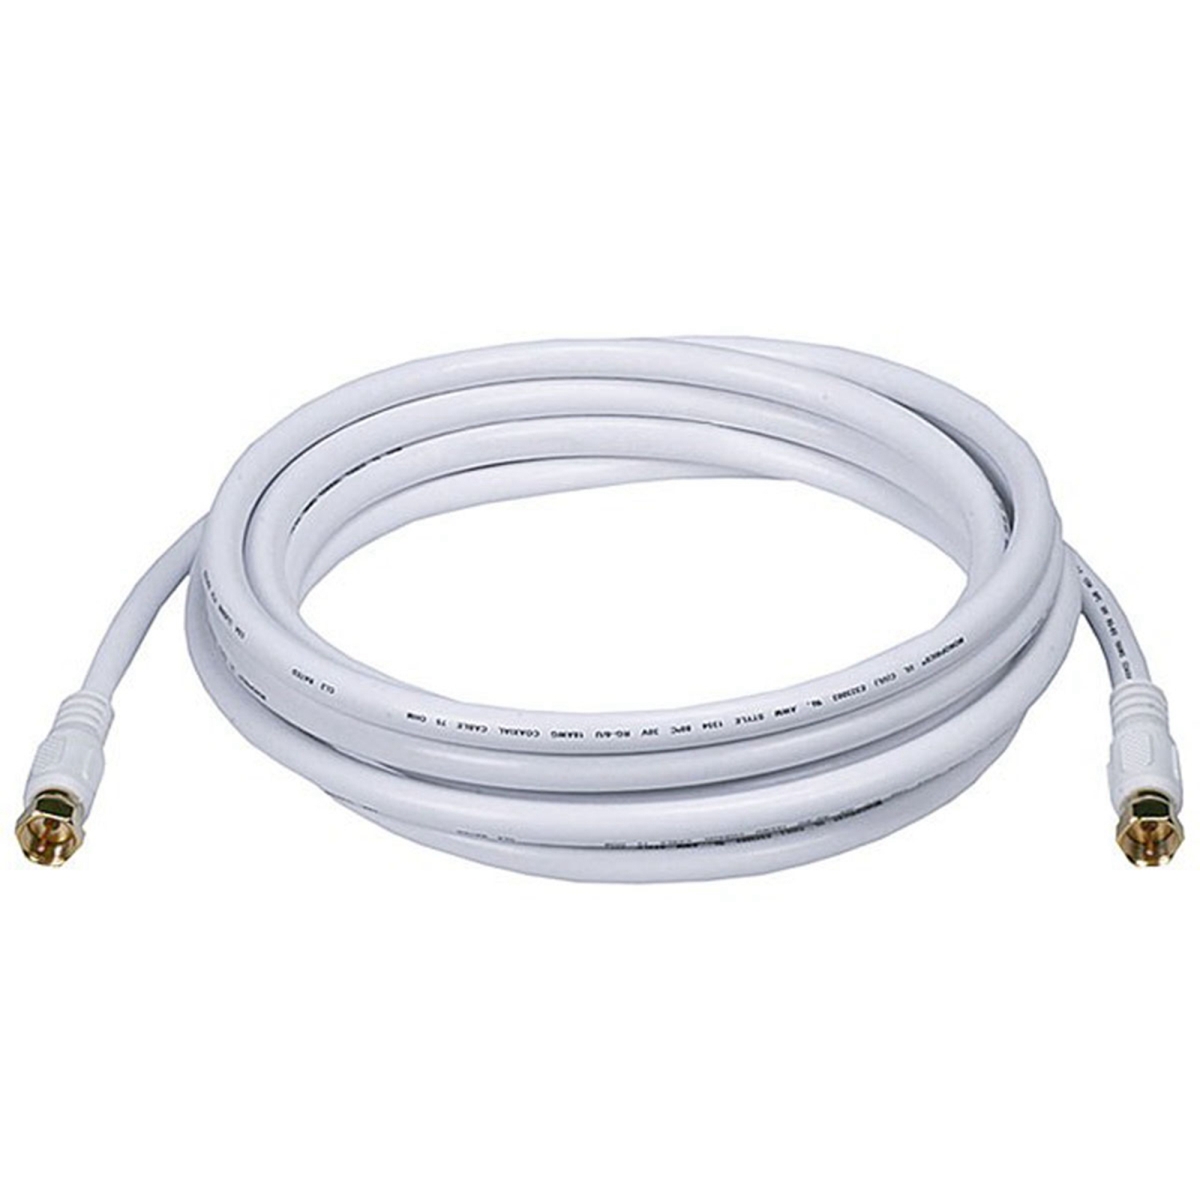 Picture of Digiwave RG621012WF 12 ft. RG6 Coaxial Cable